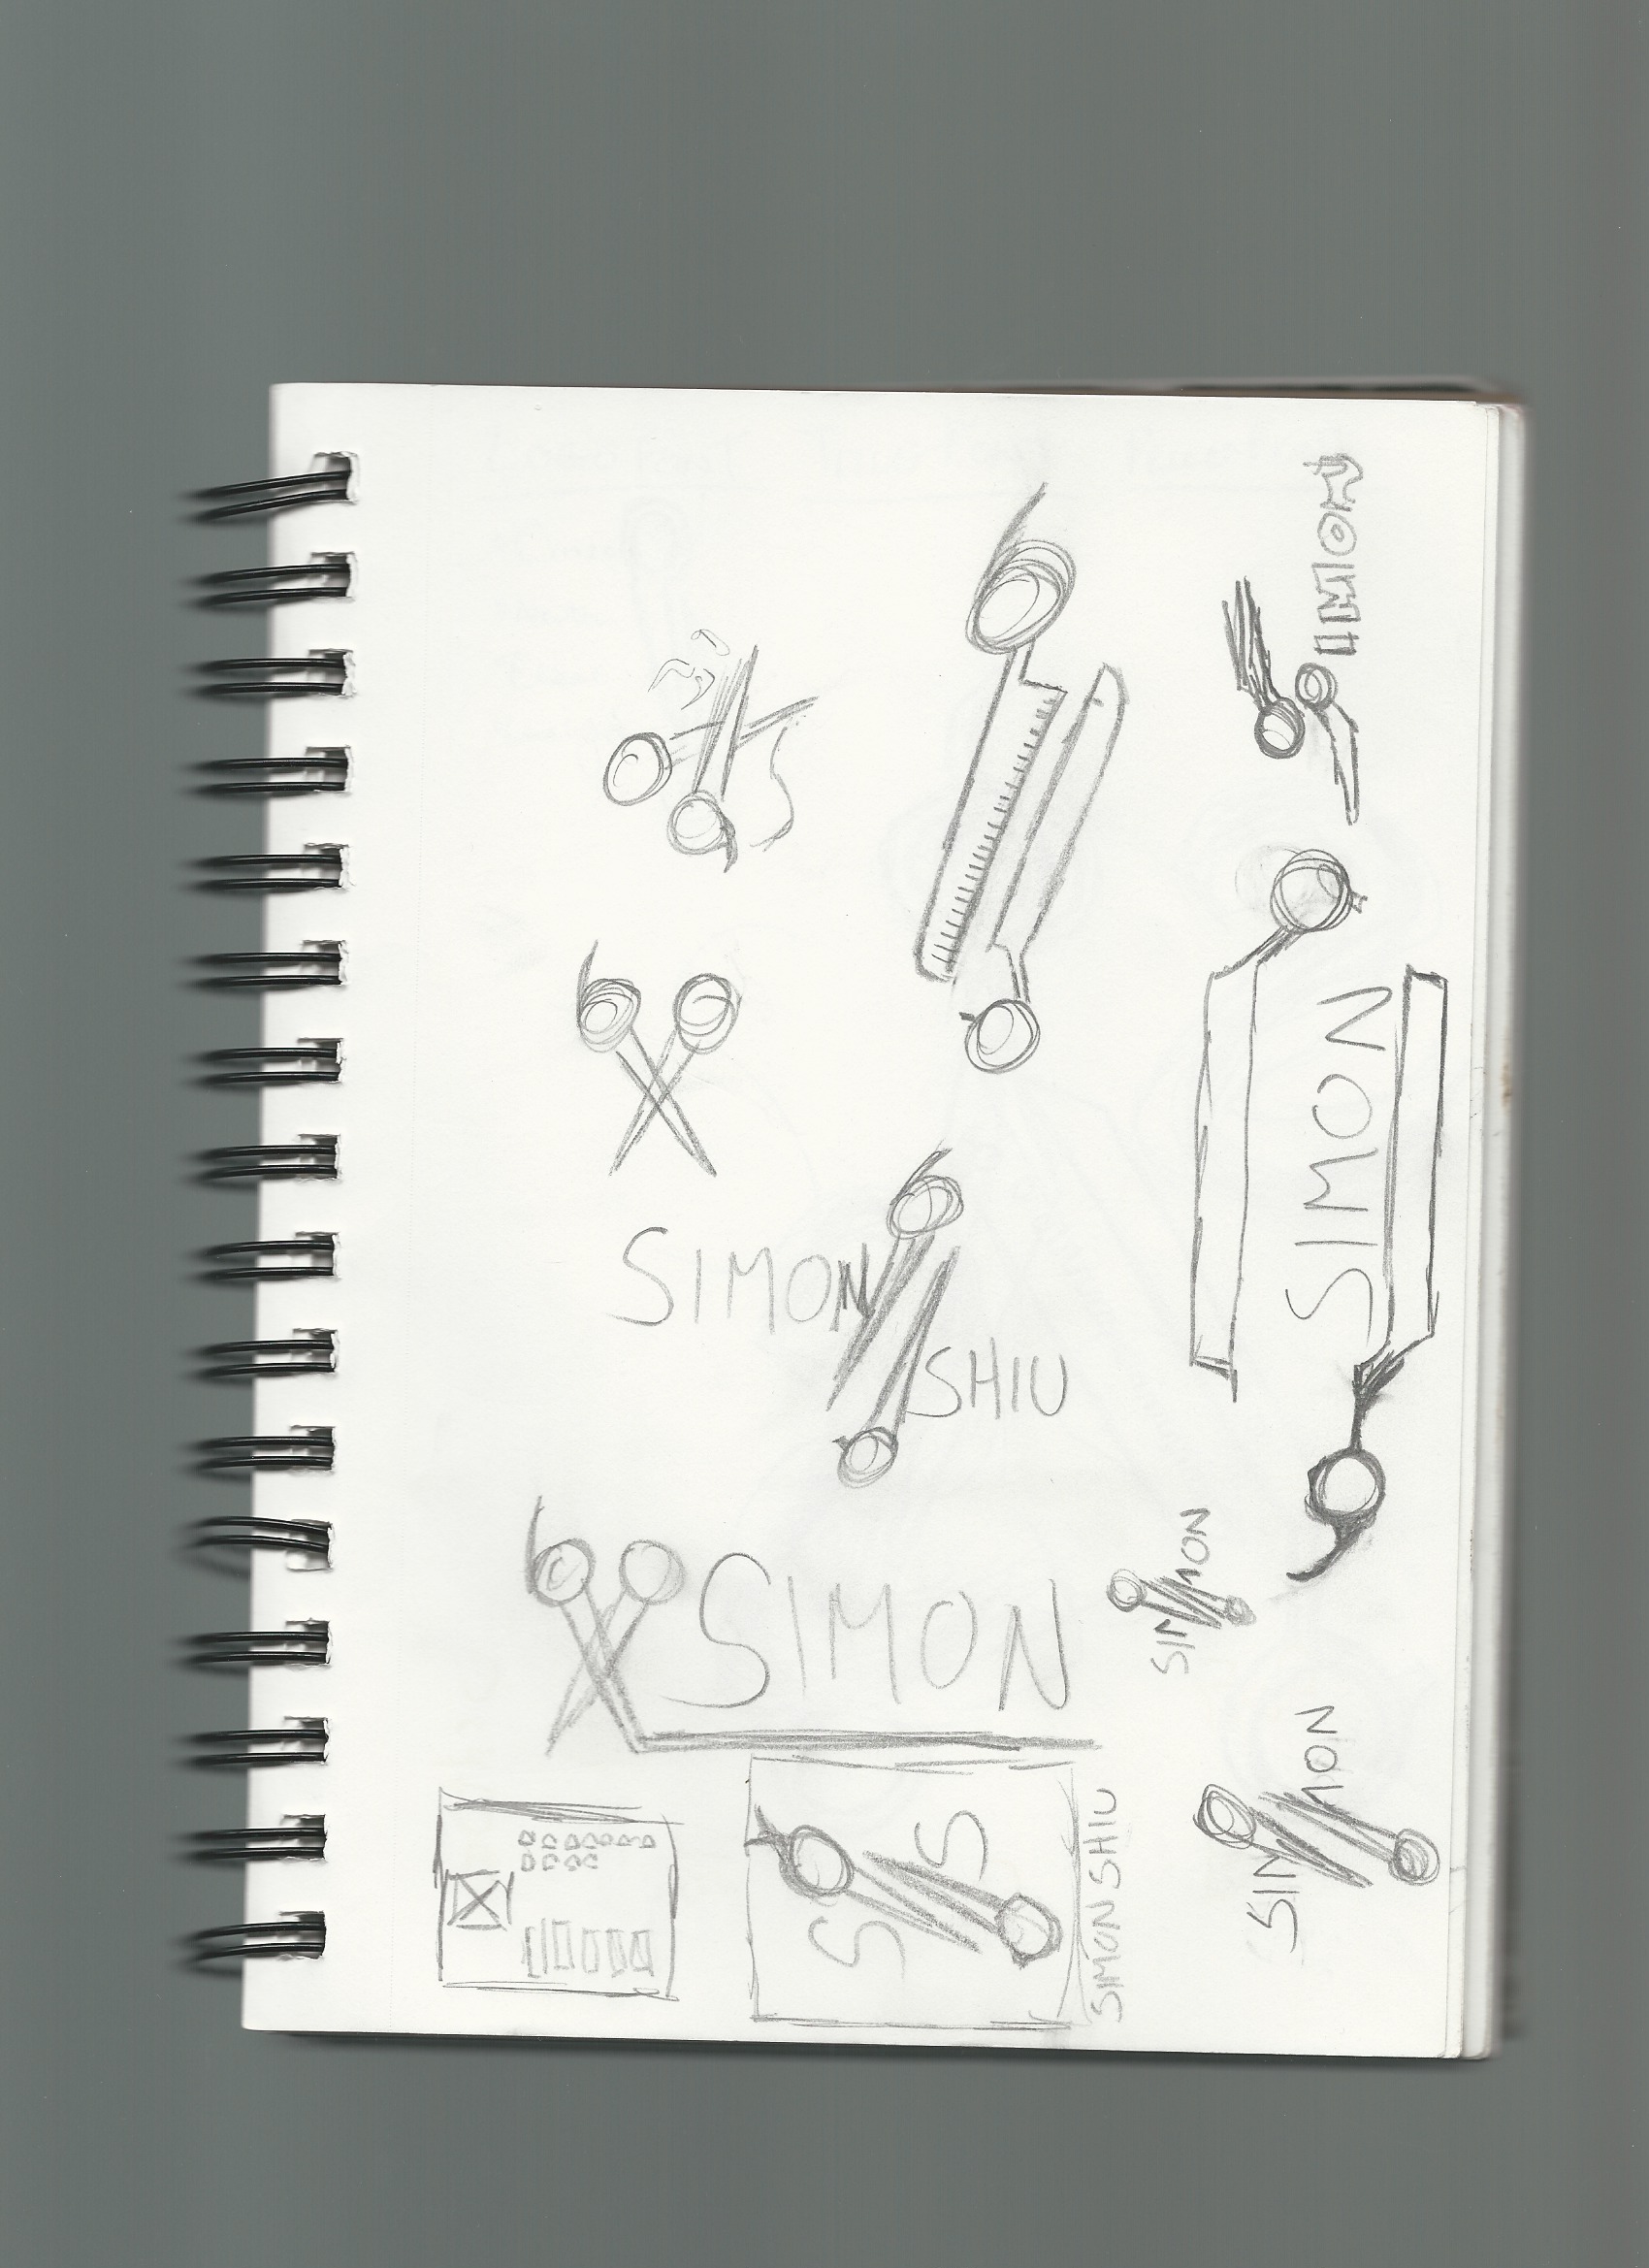 several sketches of scissors logo with clients name